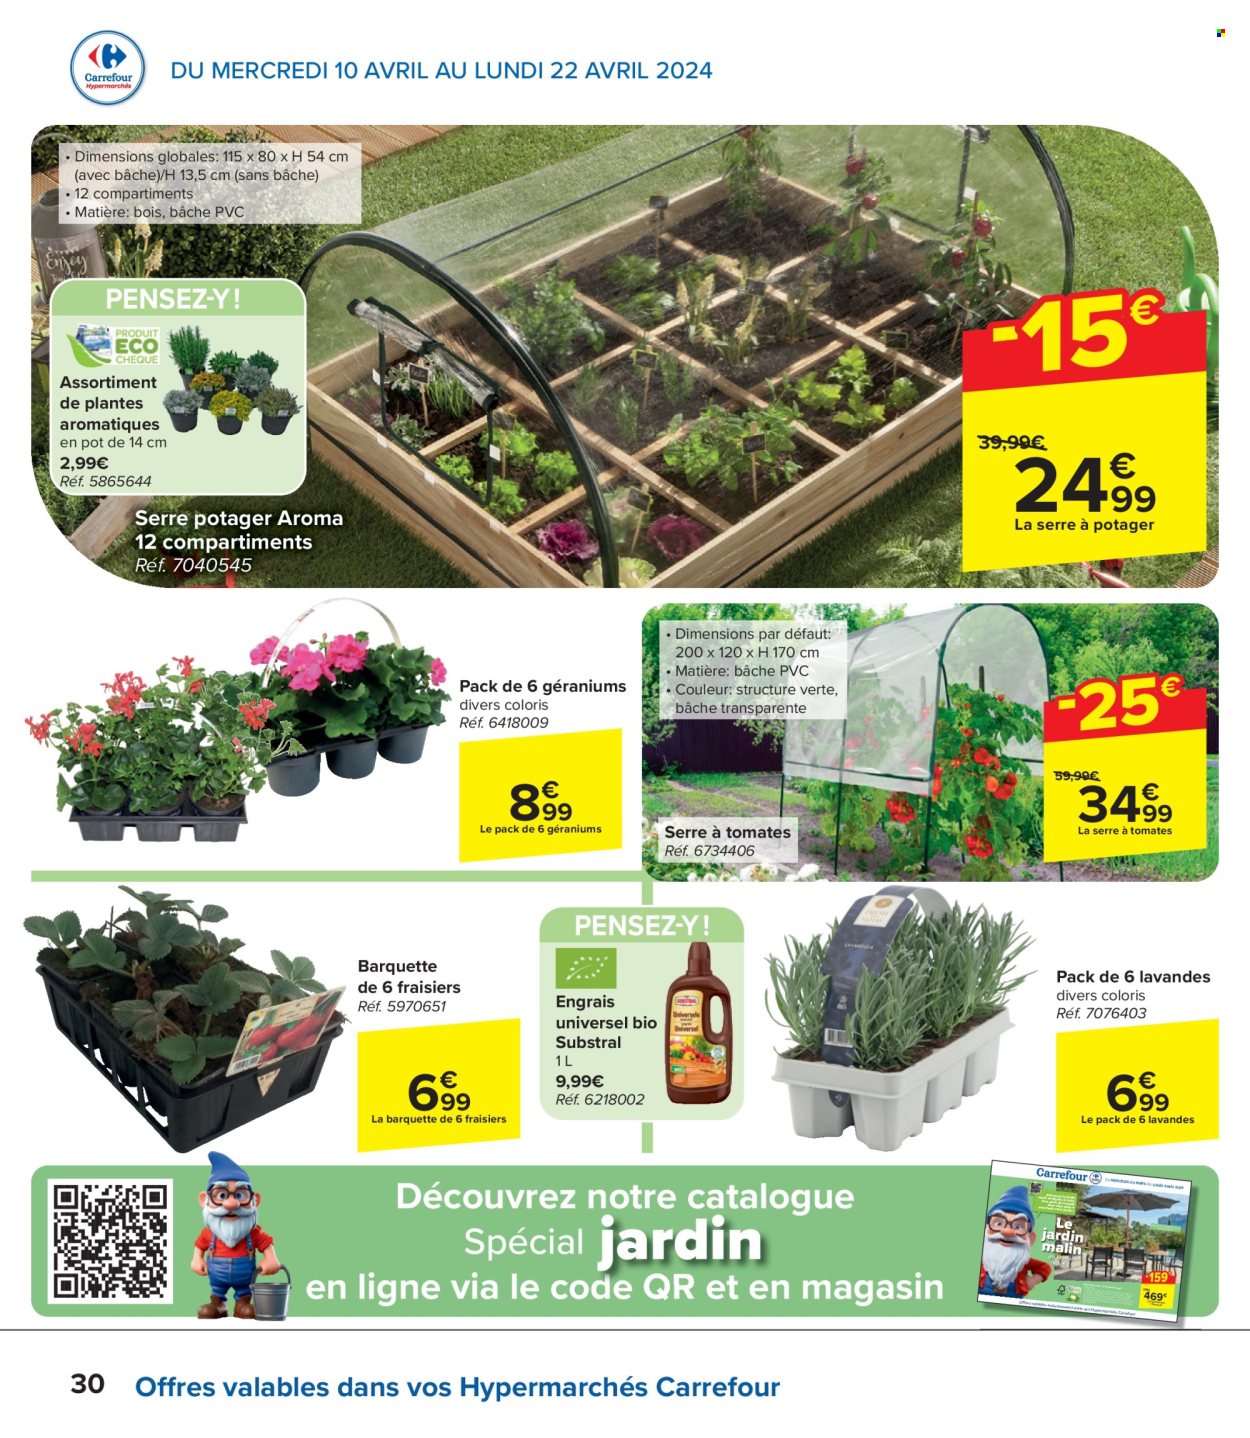 Catalogue Carrefour hypermarkt - 10.4.2024 - 22.4.2024. Page 30.